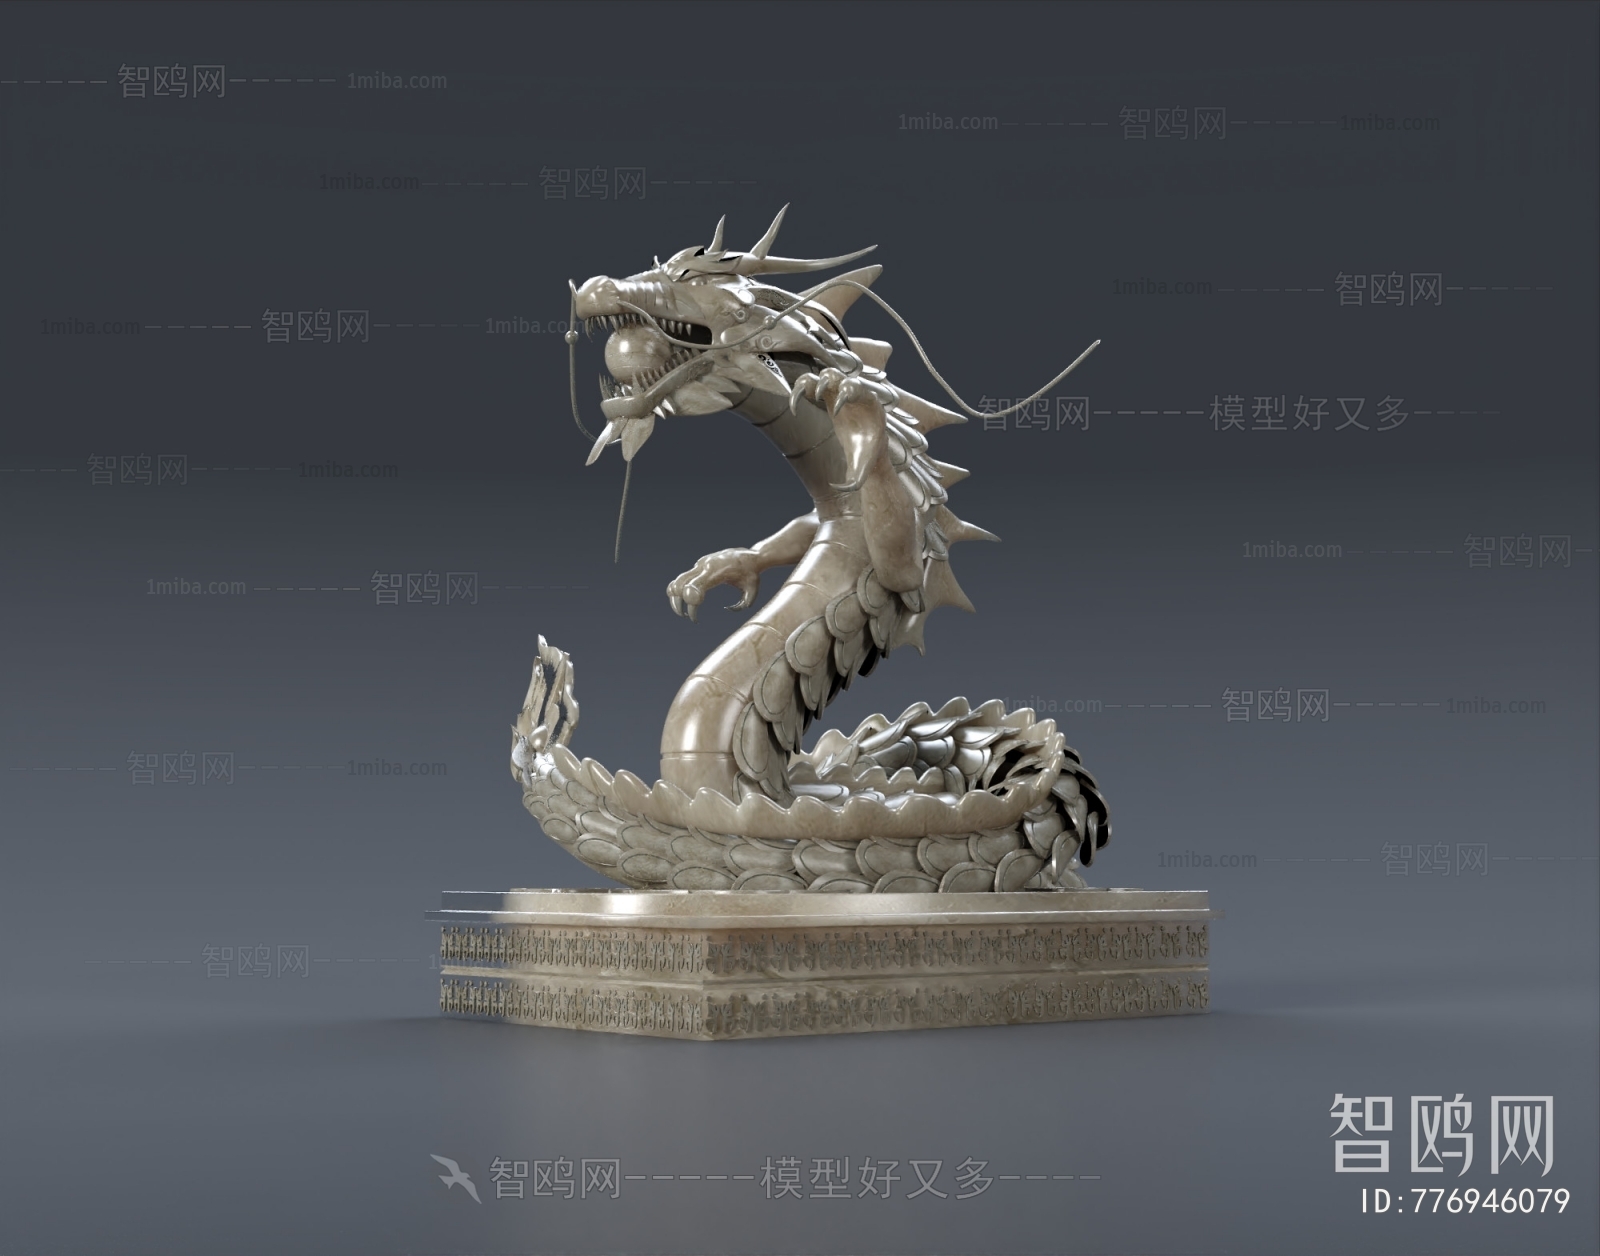 Chinese Style Sculpture